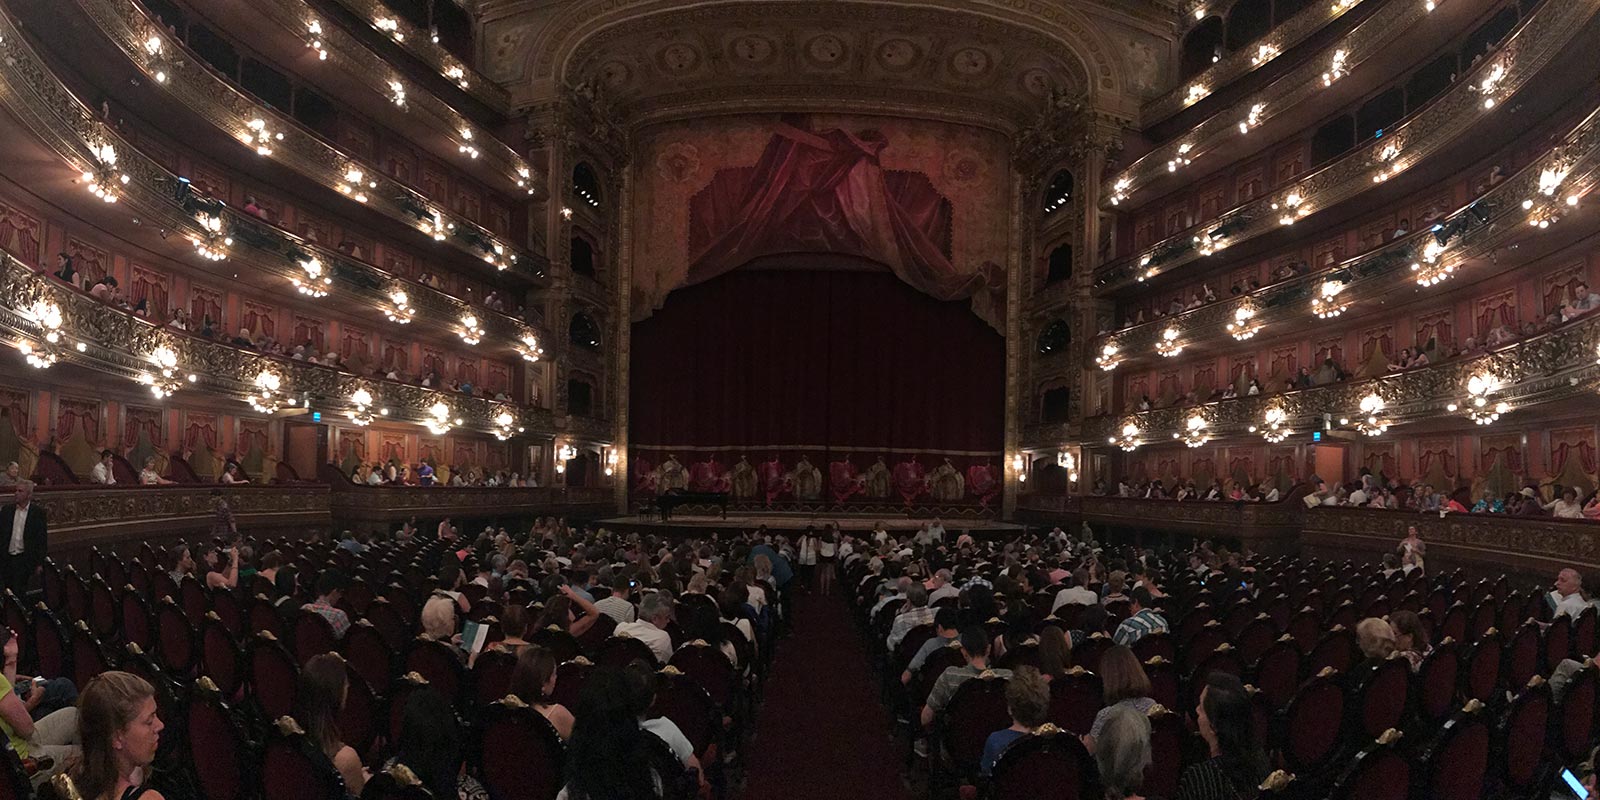 Inside the opera with people seated in Buenos Aires. The biggest derby in the world